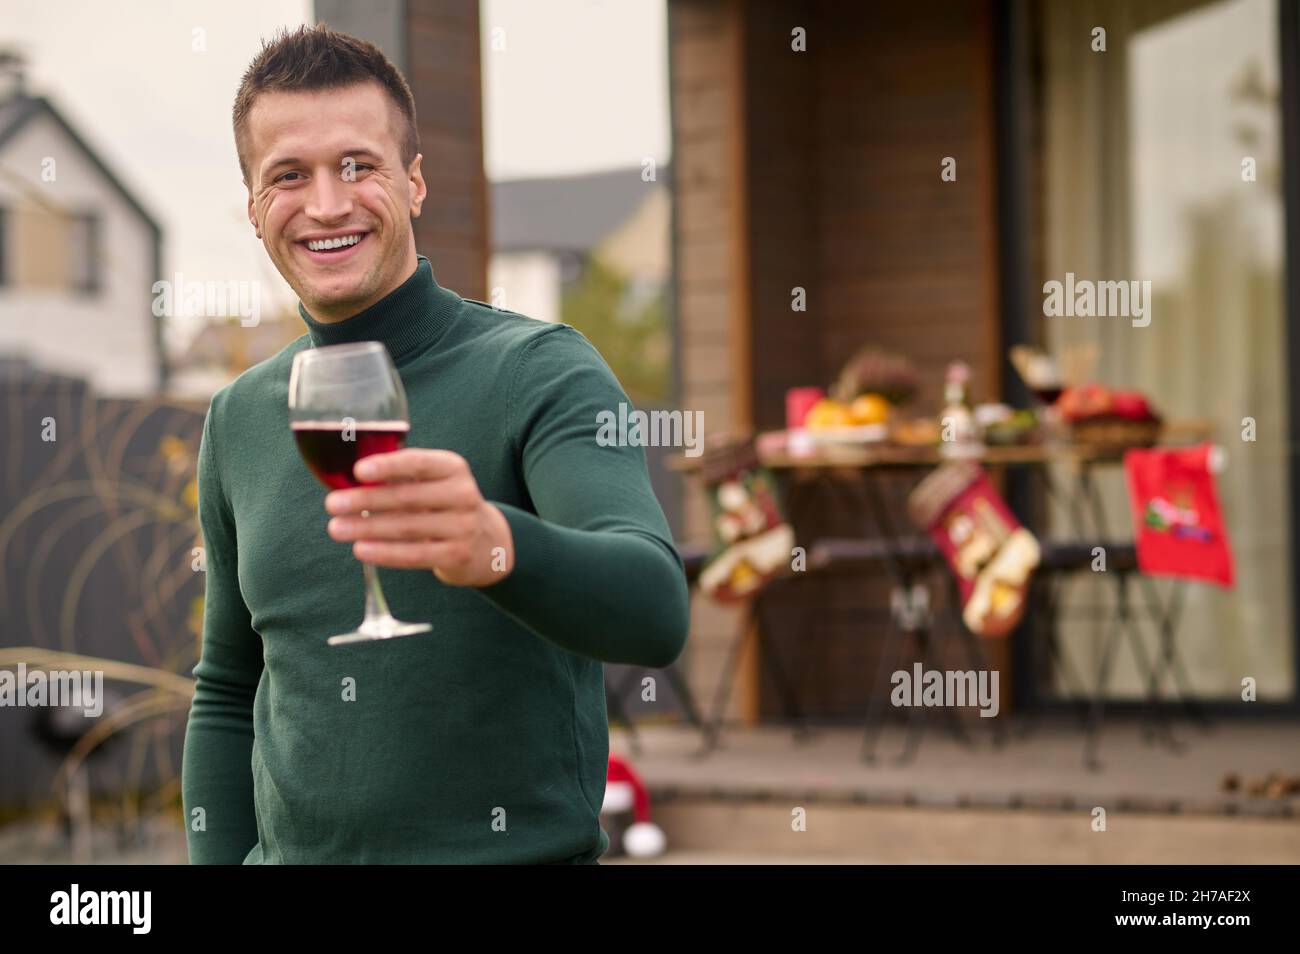 A young man with a glass of wine in hand Stock Photo